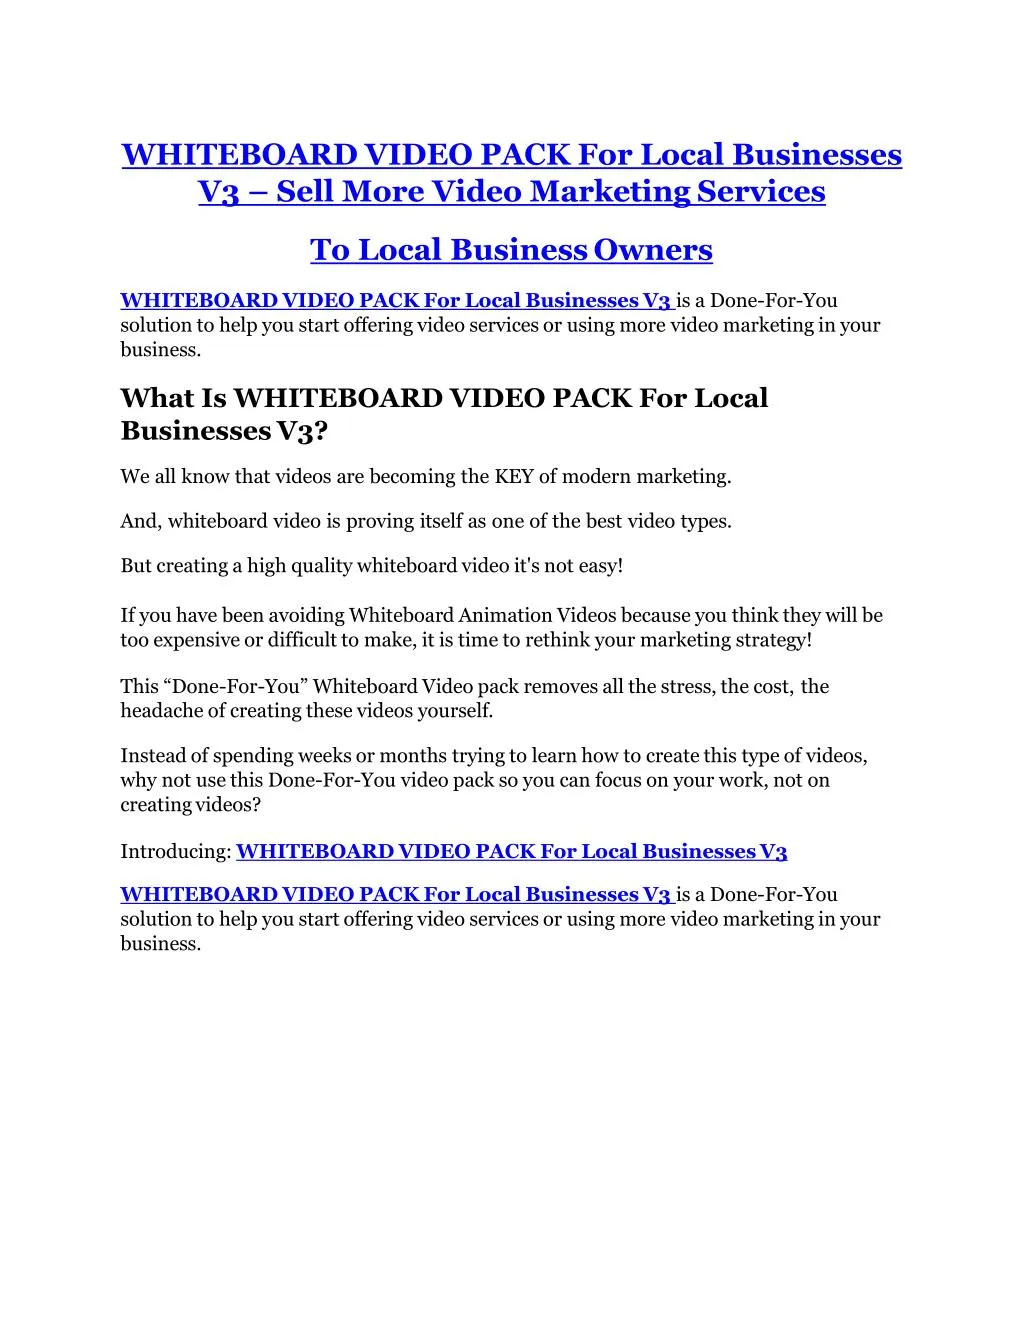 whiteboard video pack for local businesses